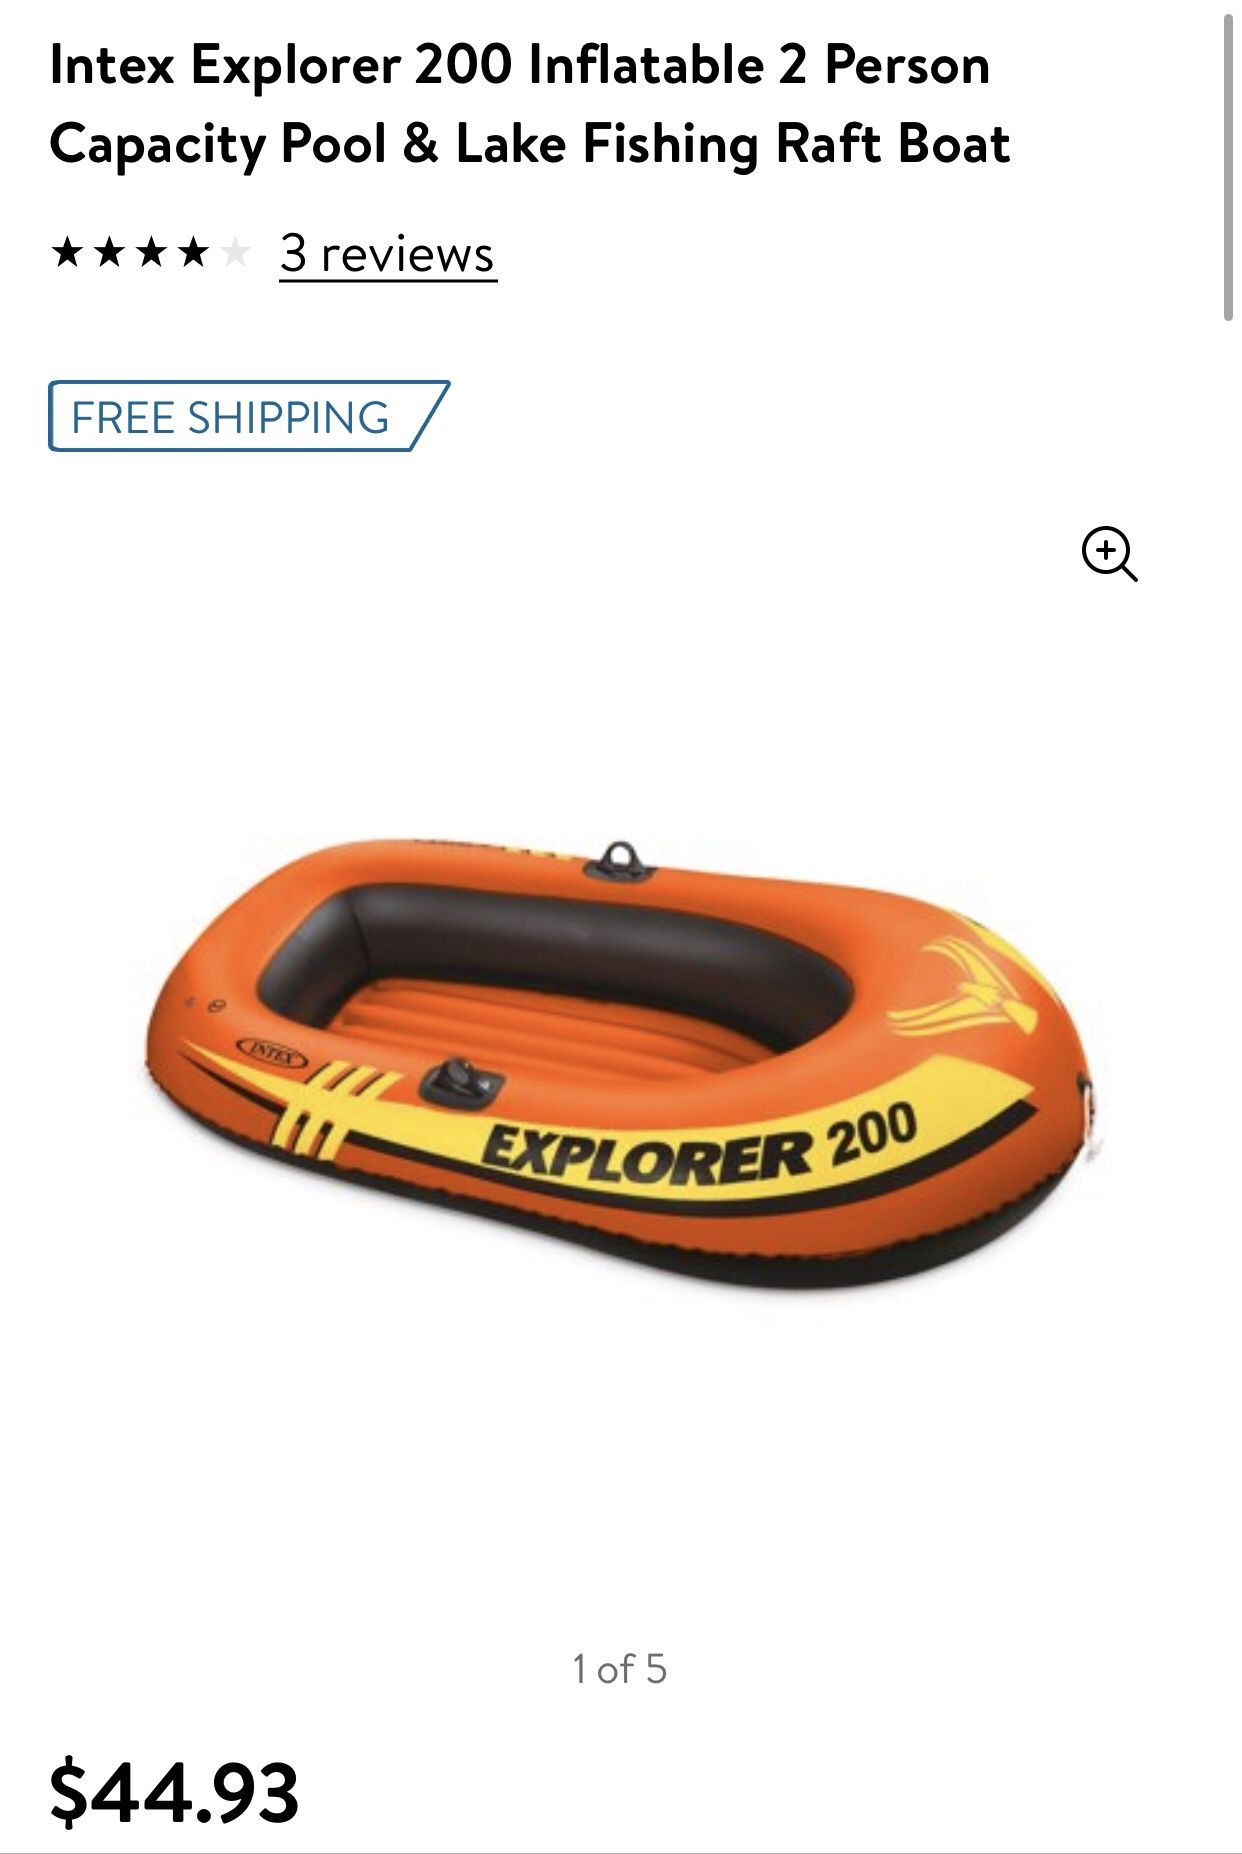 New 2 person inflatable rafting boat